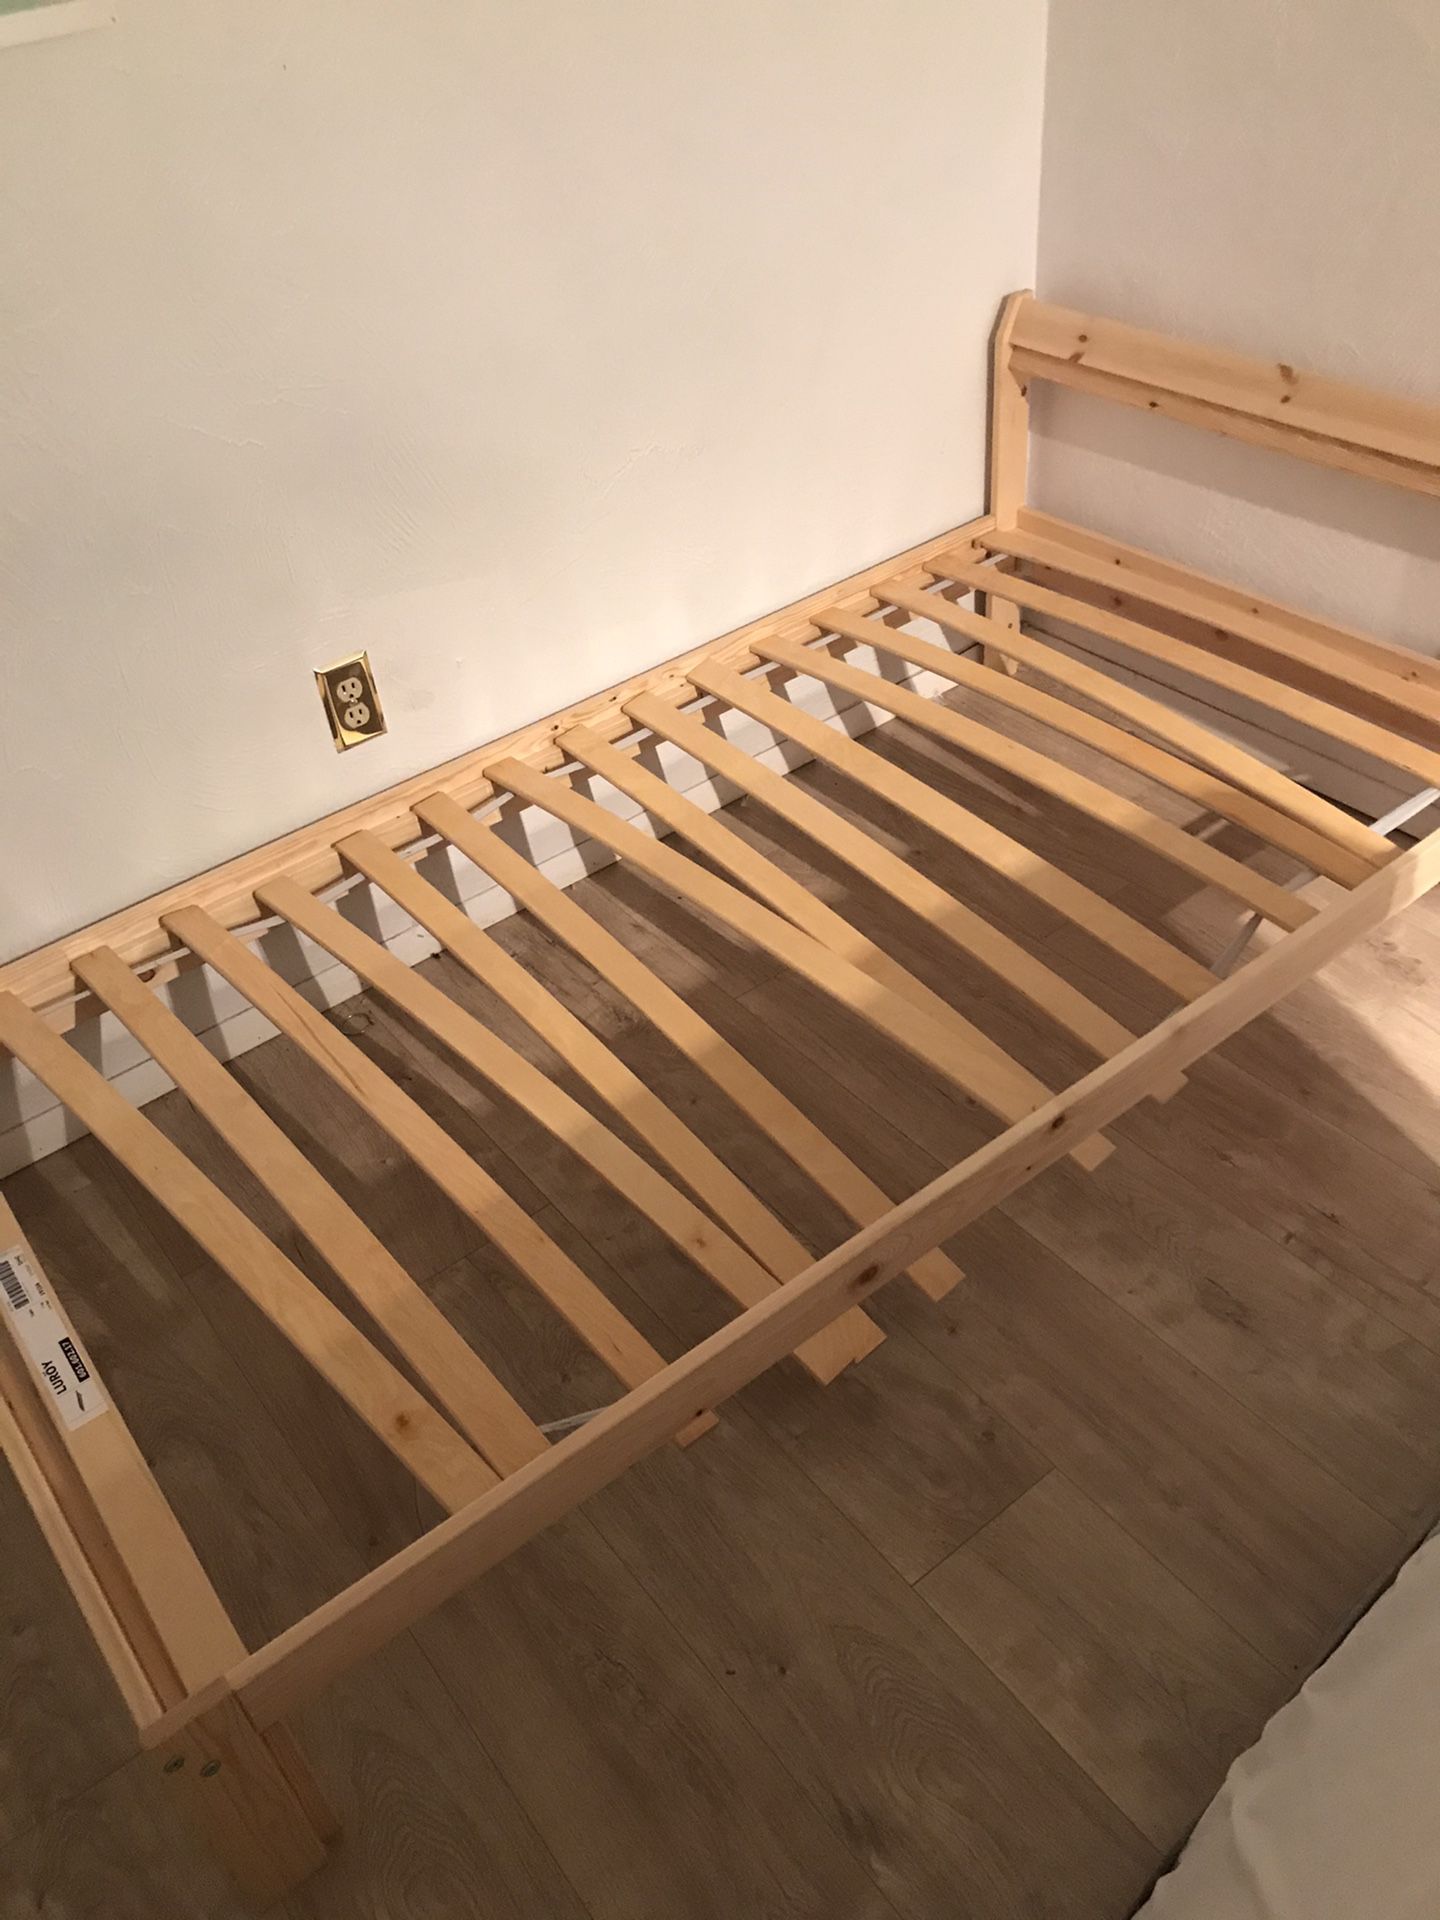 FREE bed frame - gently used IKEA LURÖY twin